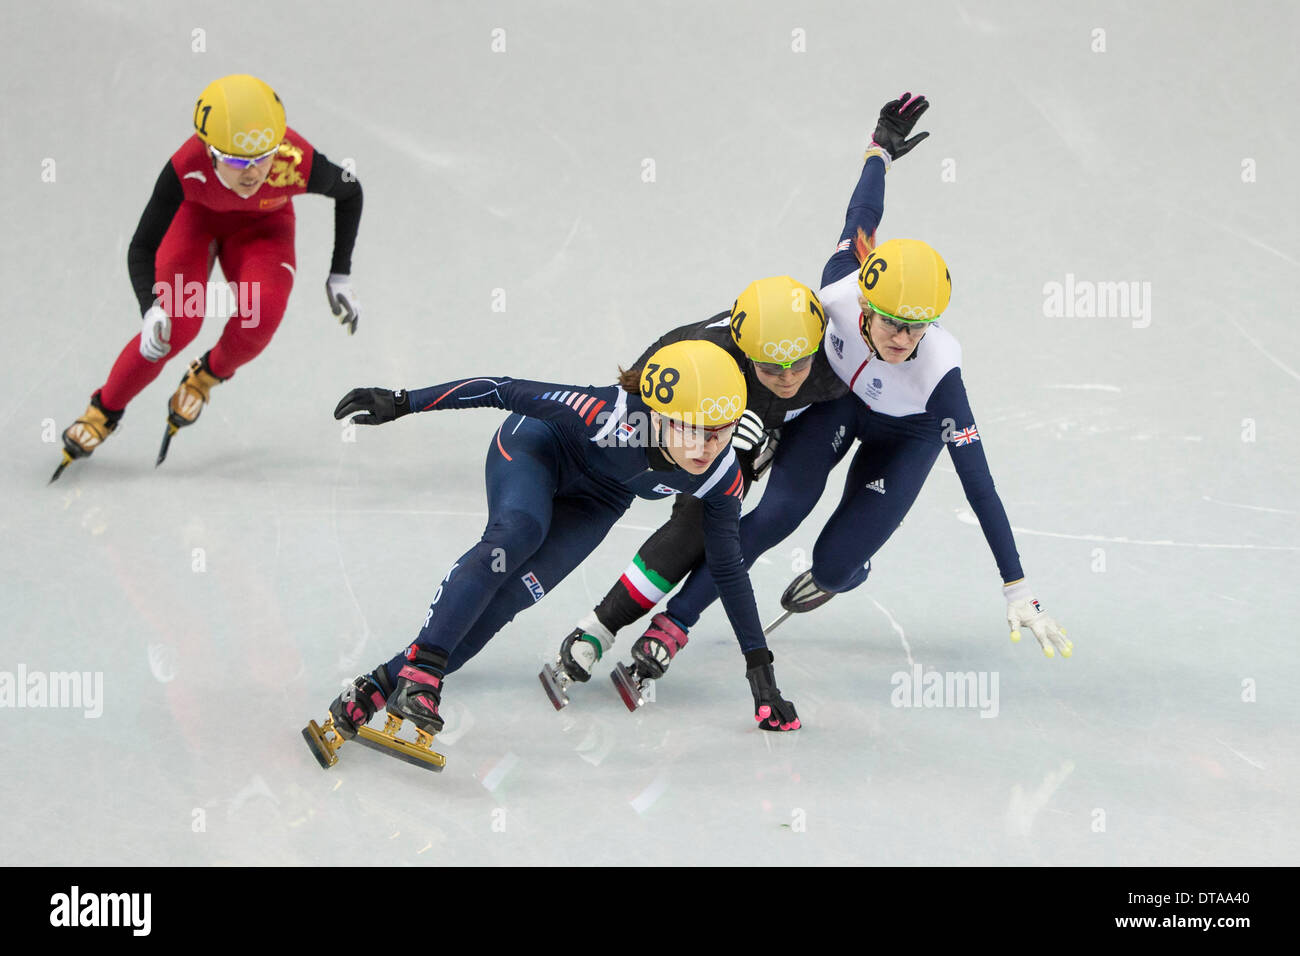 Sochi, Russia. 13th Feb, 2014.  Elise CHRISTIE (116, GBR) tries to squeeze down the inside on the first lap, goes the wrong side of a marker, takes out Arianna FONTANA (124, ITA) while Park SEUNG-HI (138, KOR) also falls on the exit of the turn. CHRISTIE is later penalised for same, thus missing out on a medal - during the final of the Women's 500m Short Track Speed Skating competition at the Iceberg Skating Palace, Coastal Cluster - XXII Olympic Winter Games © Action Plus Sports Images/Alamy Live News Credit:  Action Plus Sports/Alamy Live News Stock Photo